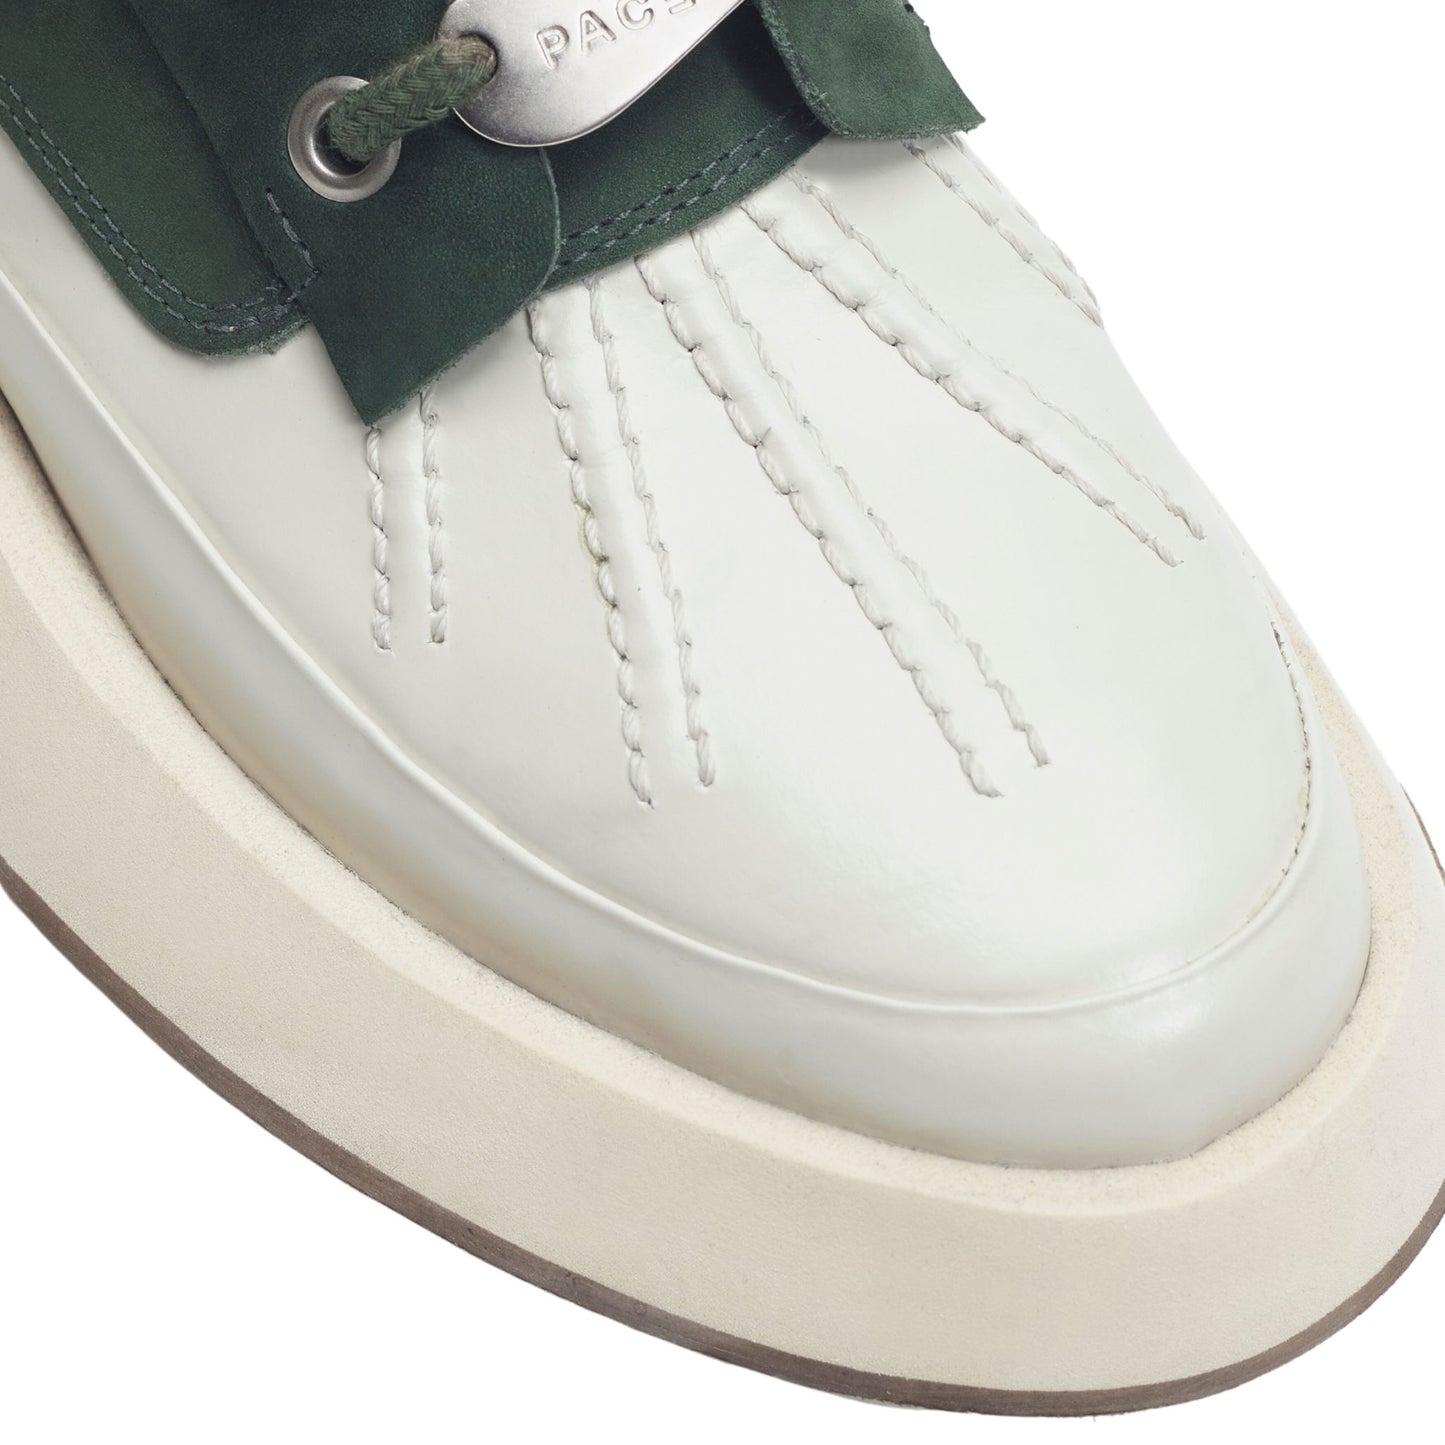 PACE - XP Duckboot "Green/Off White" - THE GAME